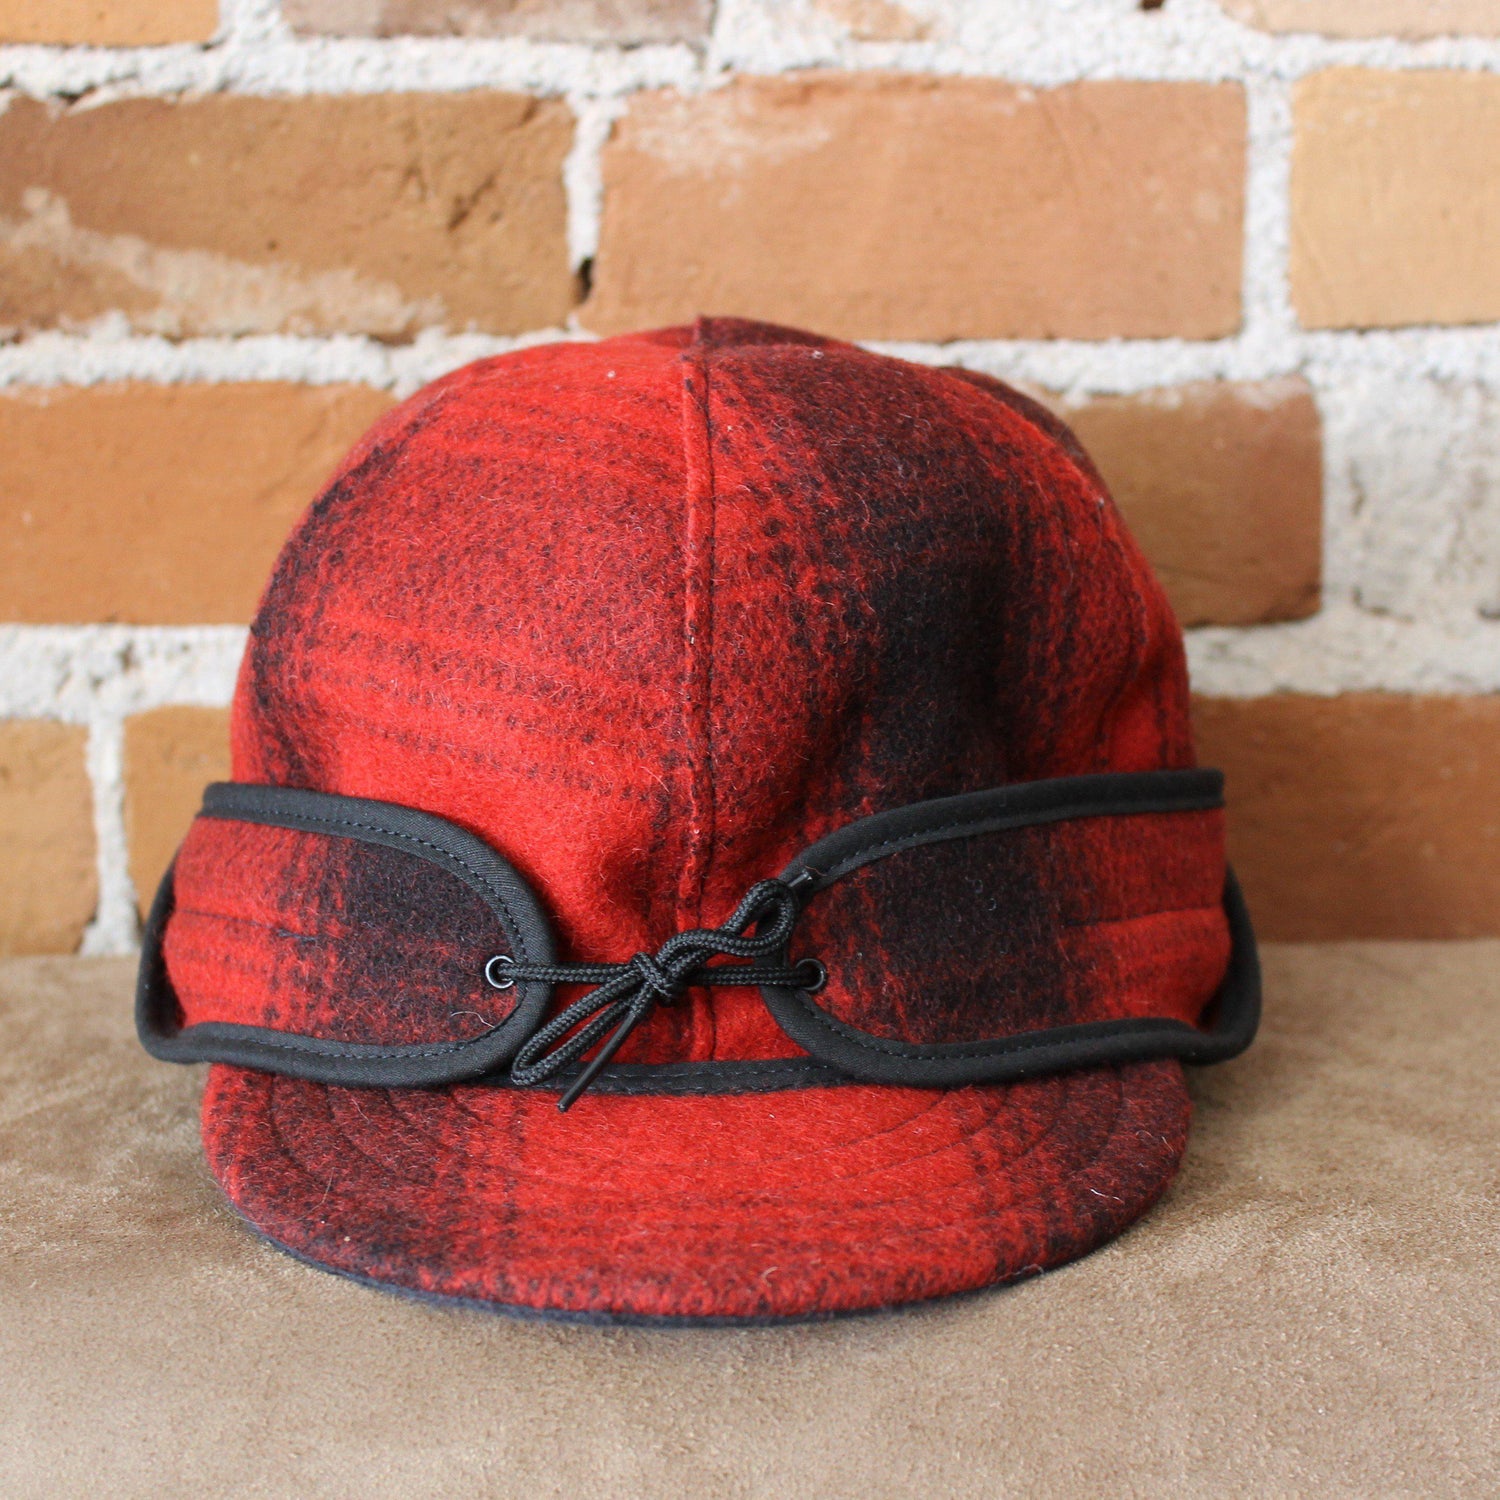 Rancher Cap In Red And Black-Atomic 79